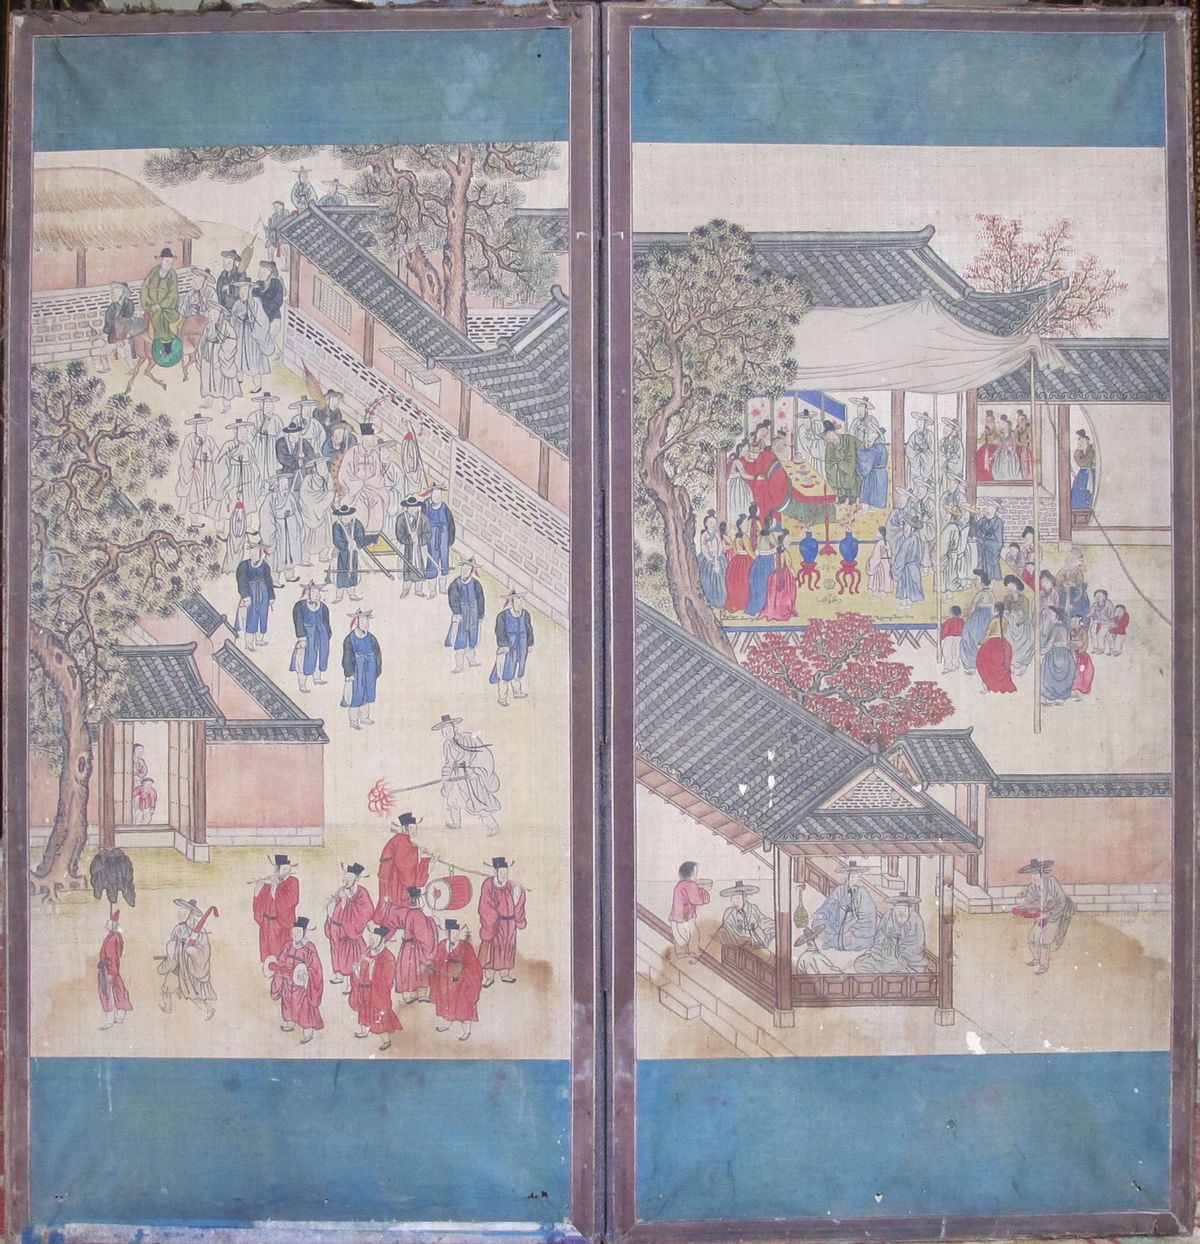 This 19th-century screen painting is among the Korean works in the museum’s collection The Trustees of the British Museum